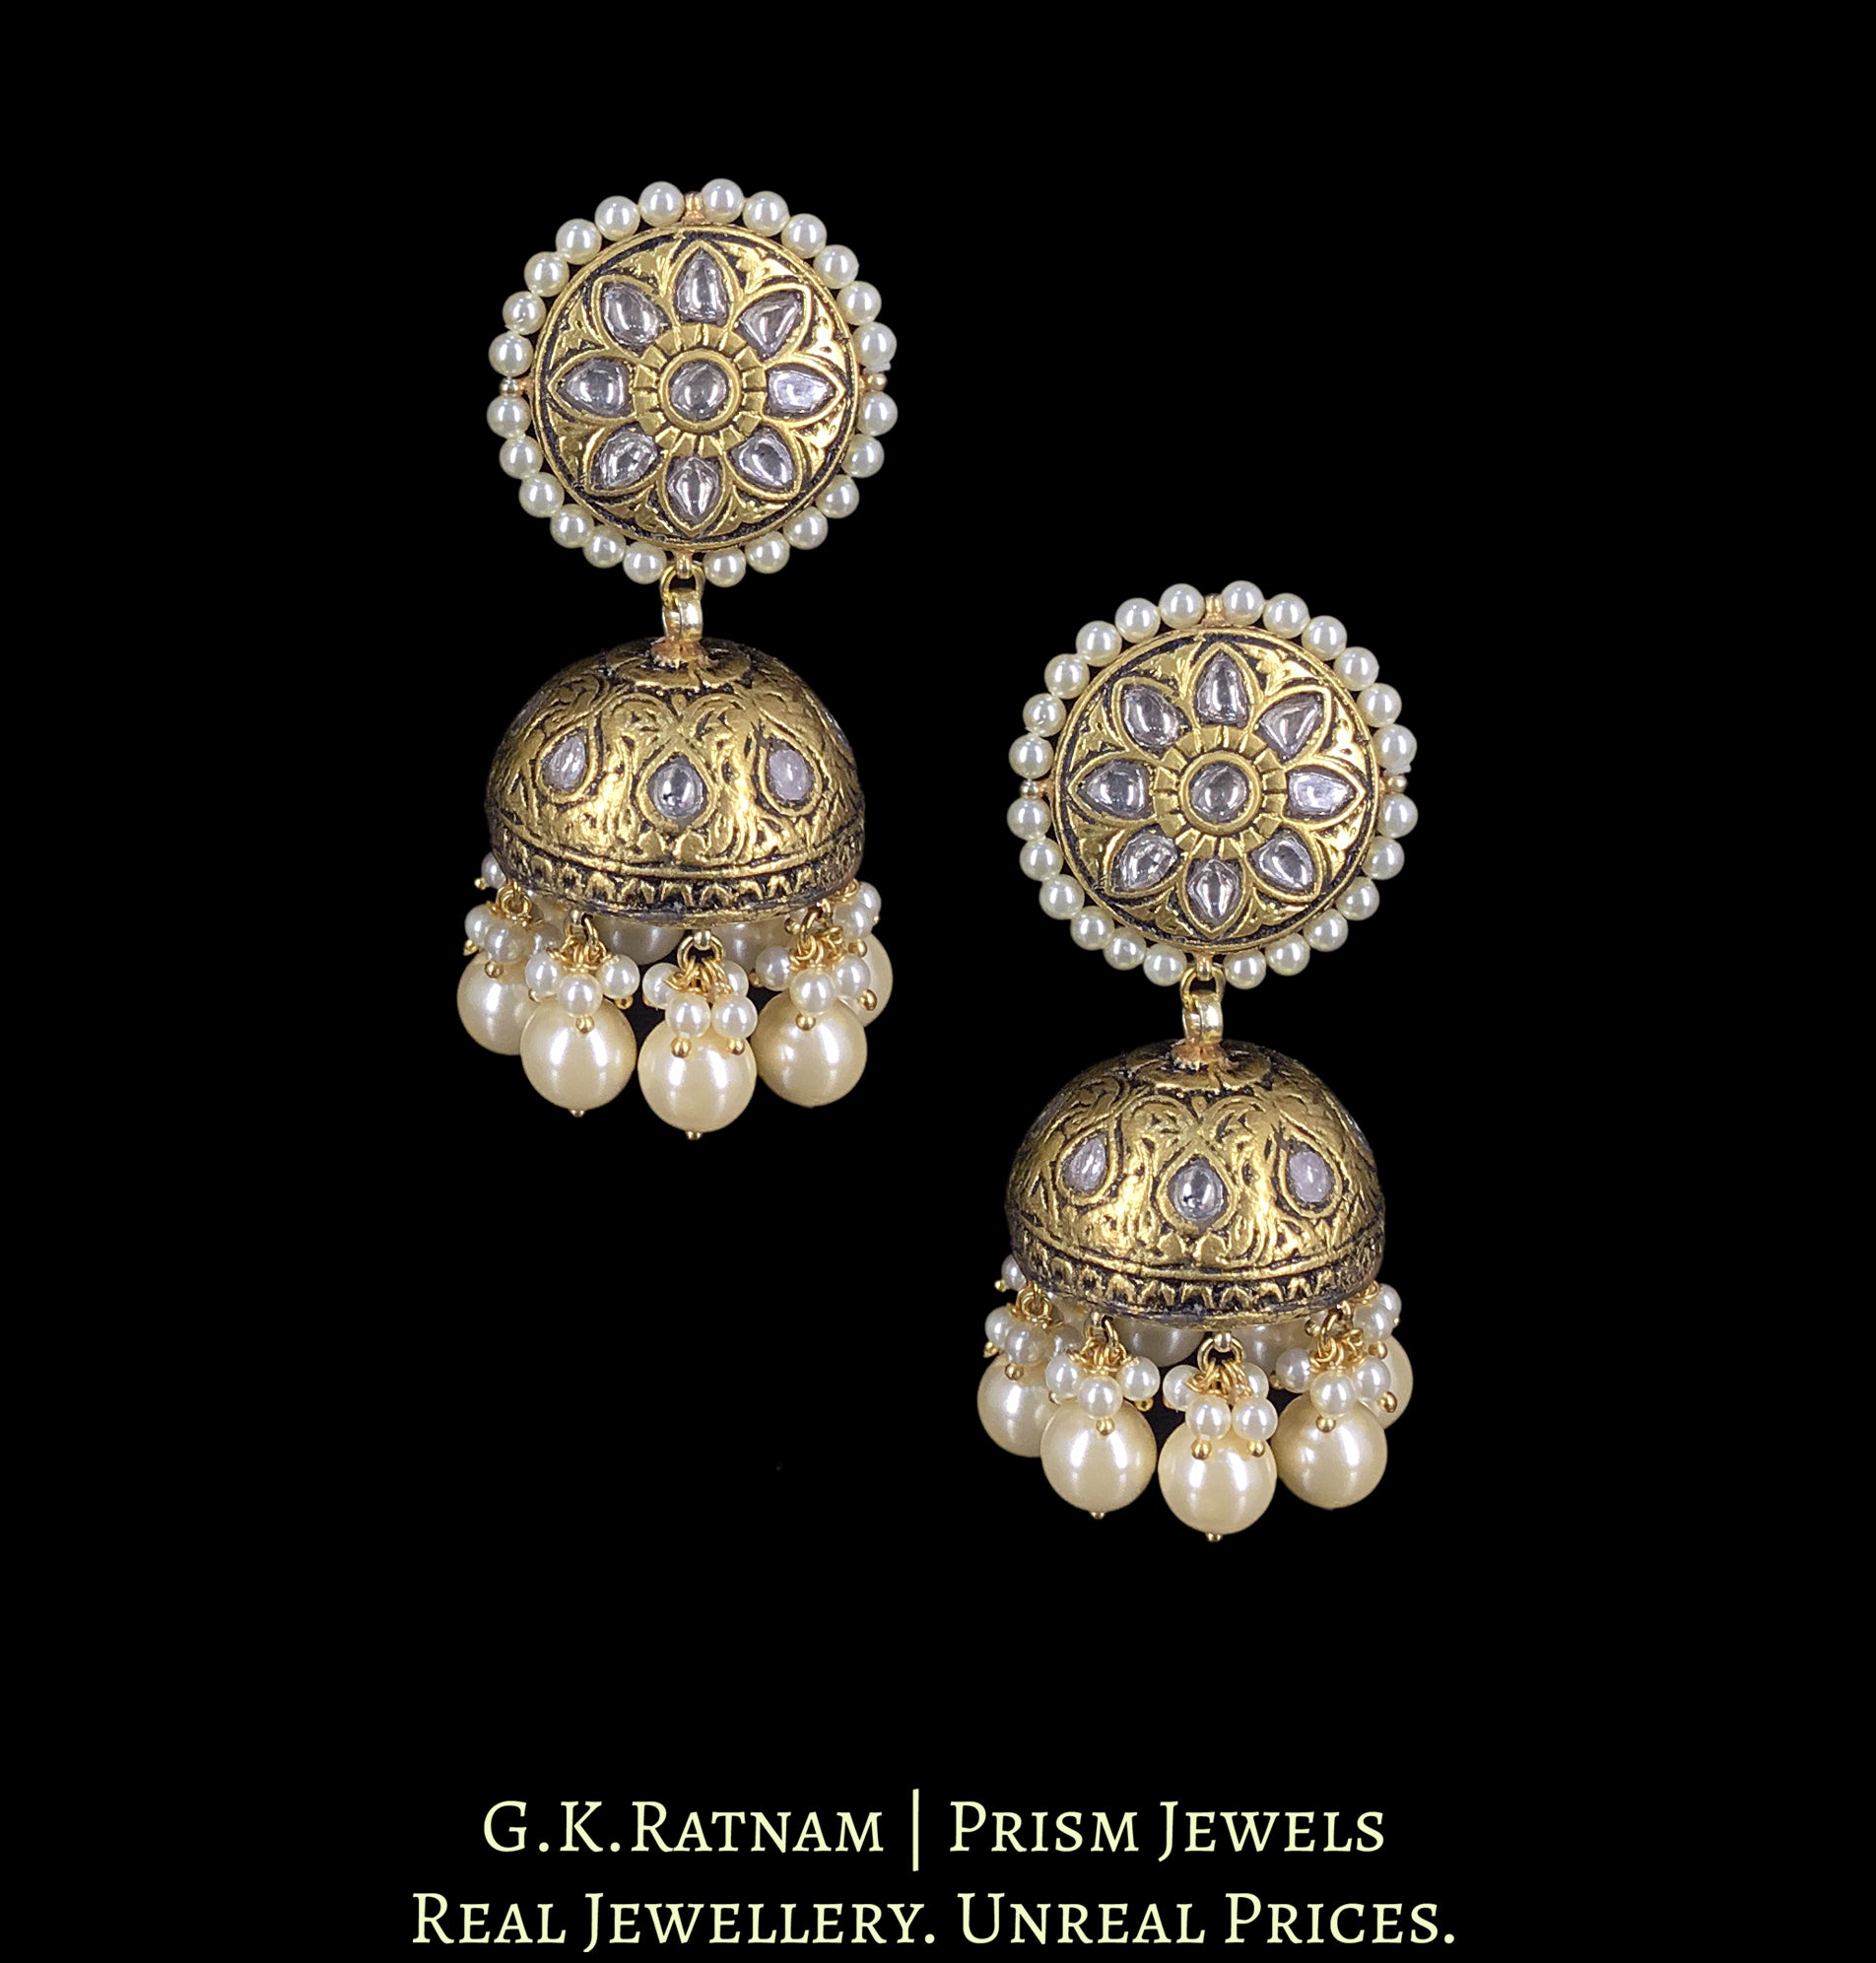 23k Gold and Diamond Polki Antique Tops and Jhumki Earring Pair with intricate goldwork - G. K. Ratnam